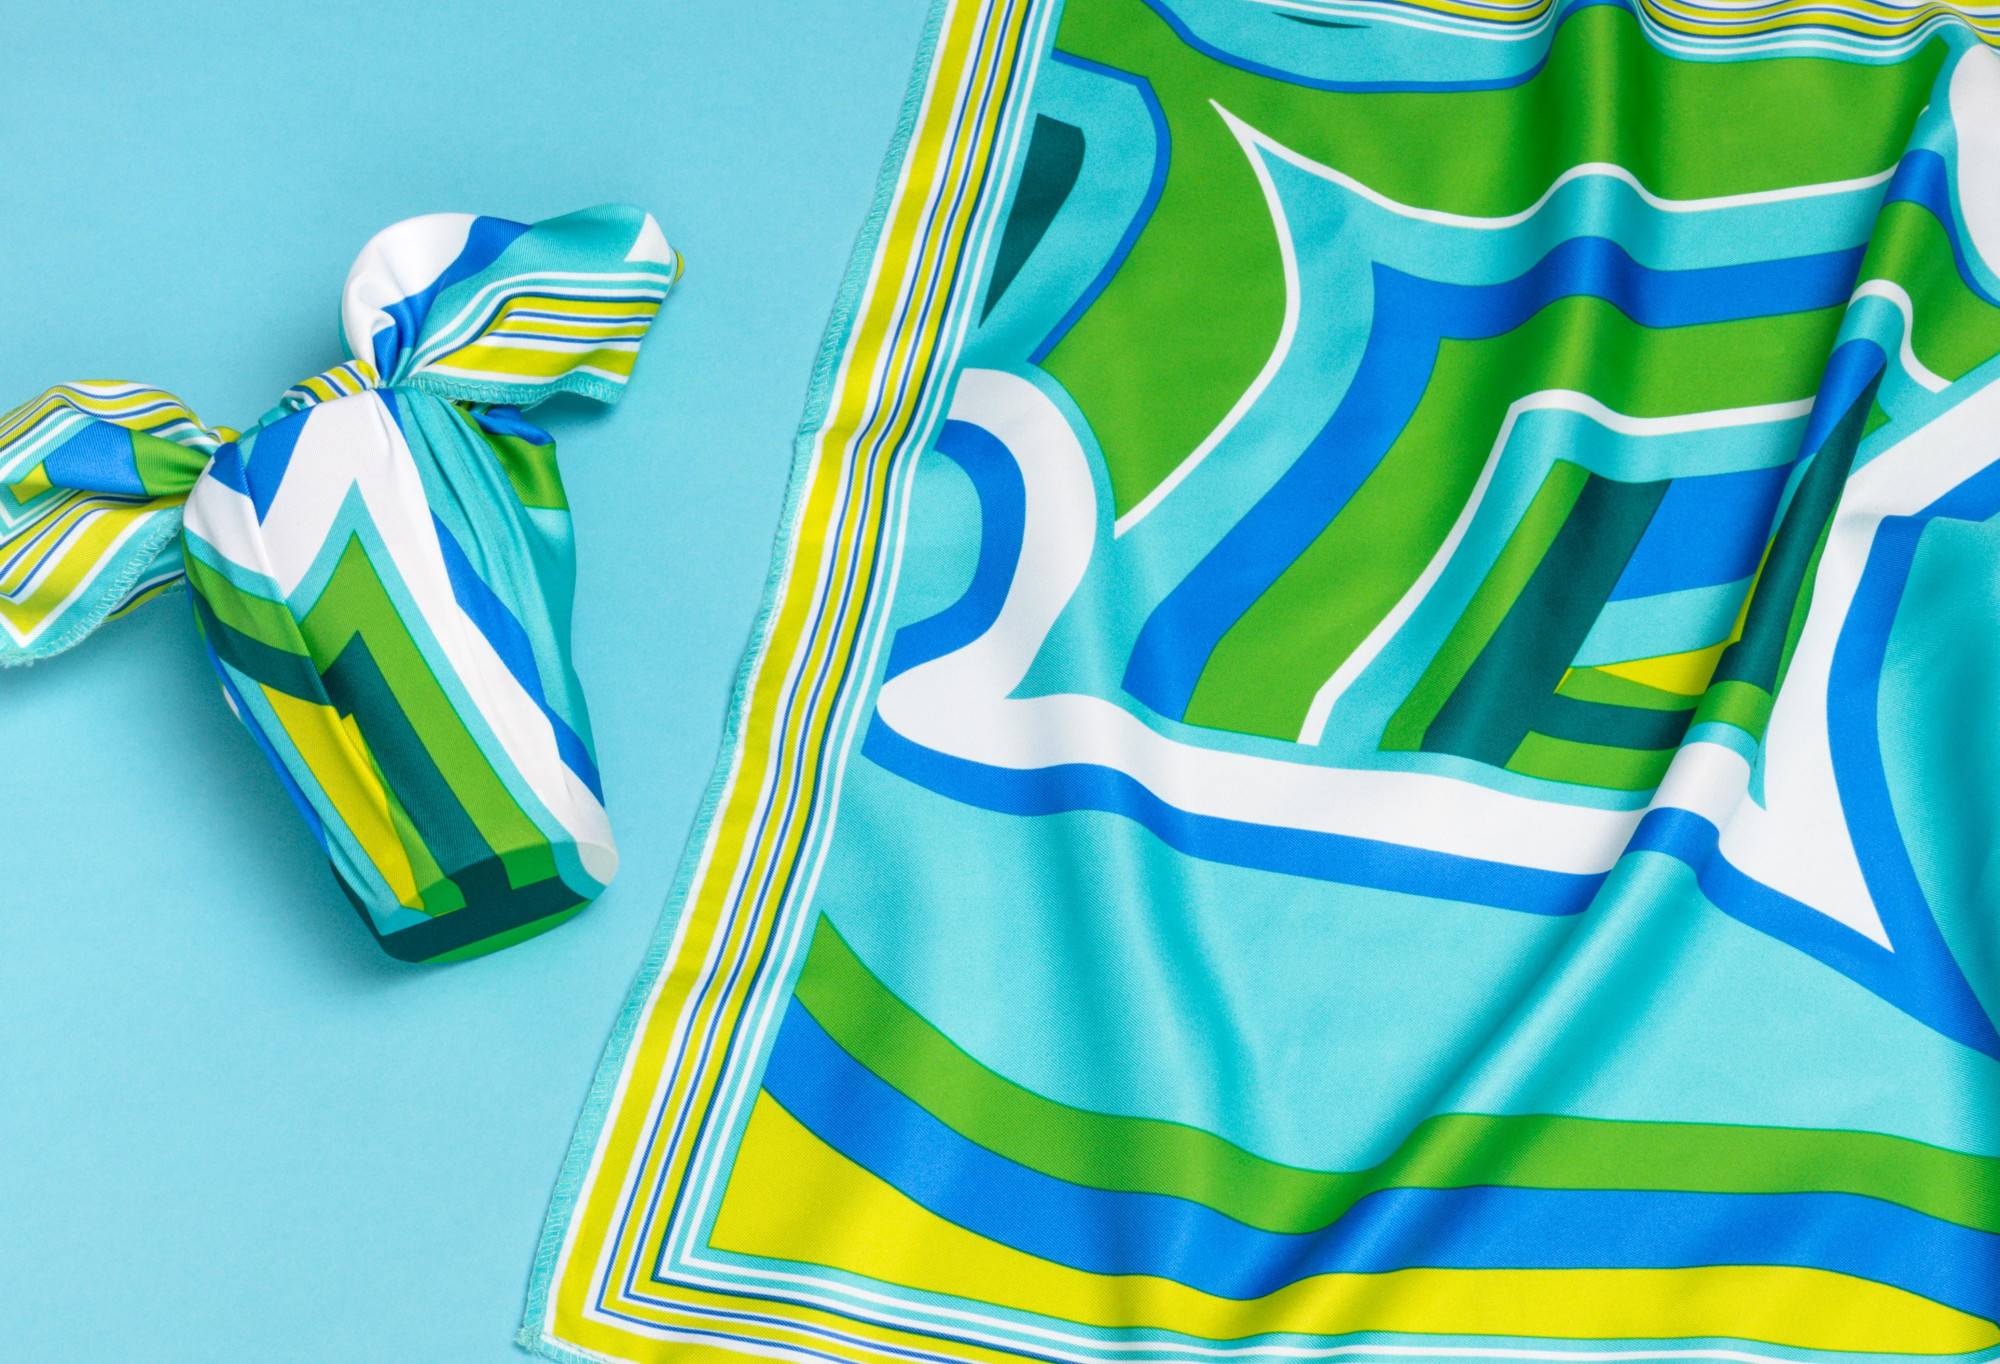 The knot wrap is wrapped and knotted around a perfume bottle, as well as laid out flat, on a light blue background.